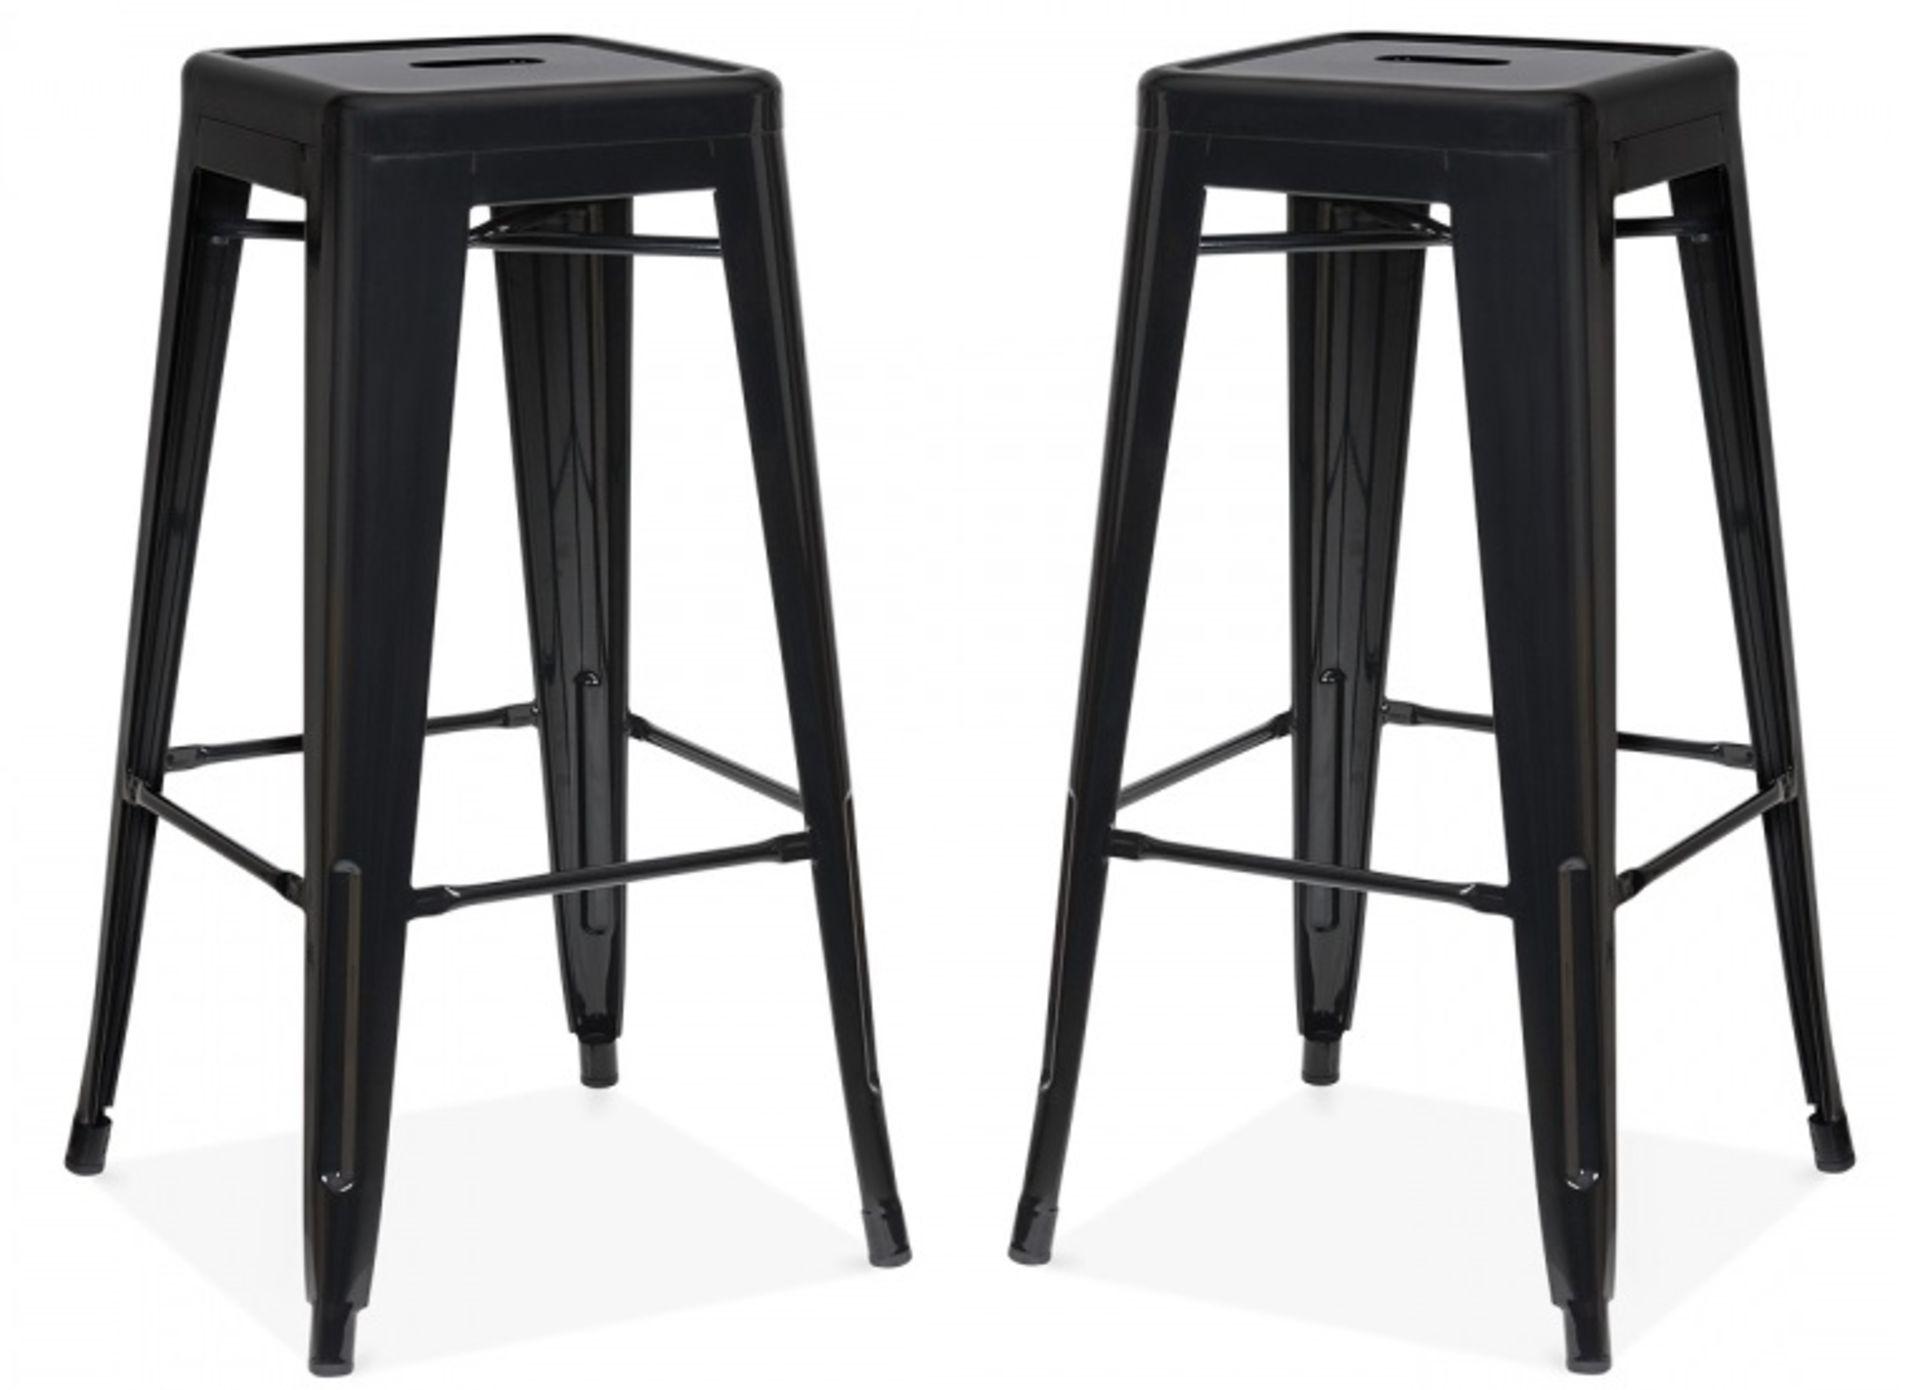 2 x Xavier Pauchard Inspired Industrial Black Bar Stools - Pair of - Lightweight and Stackable